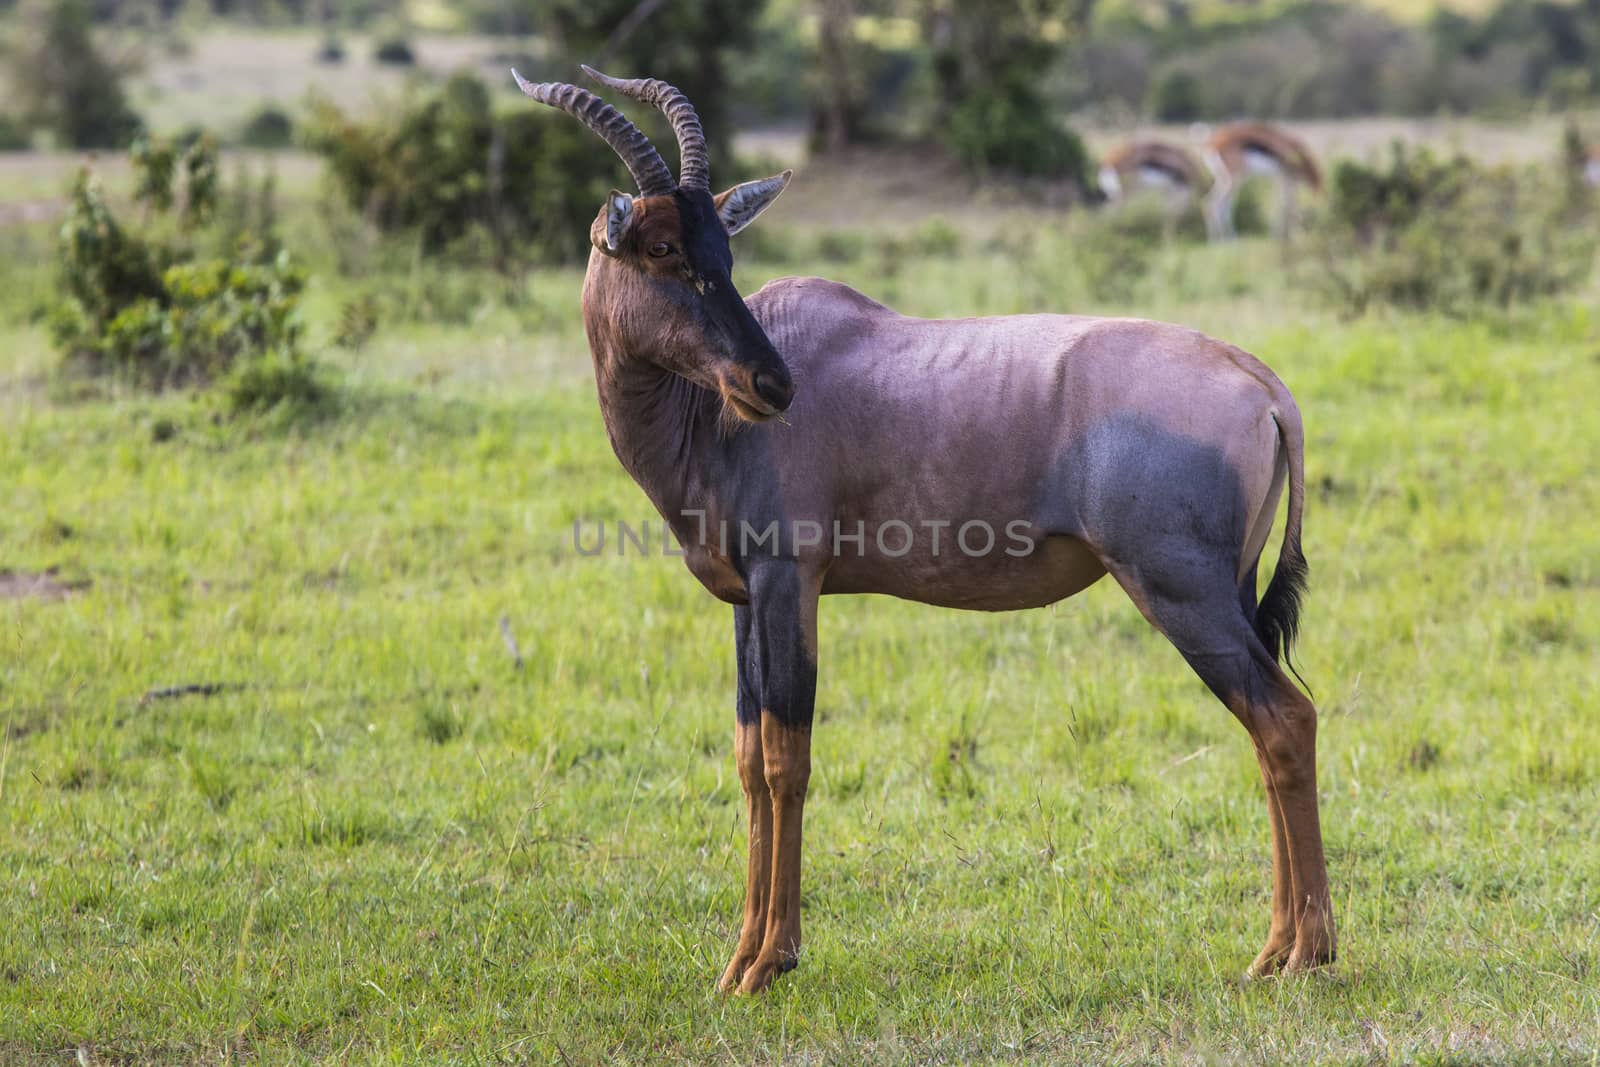 Topi Antelope in the National Reserve of Africa, Kenya by mariusz_prusaczyk